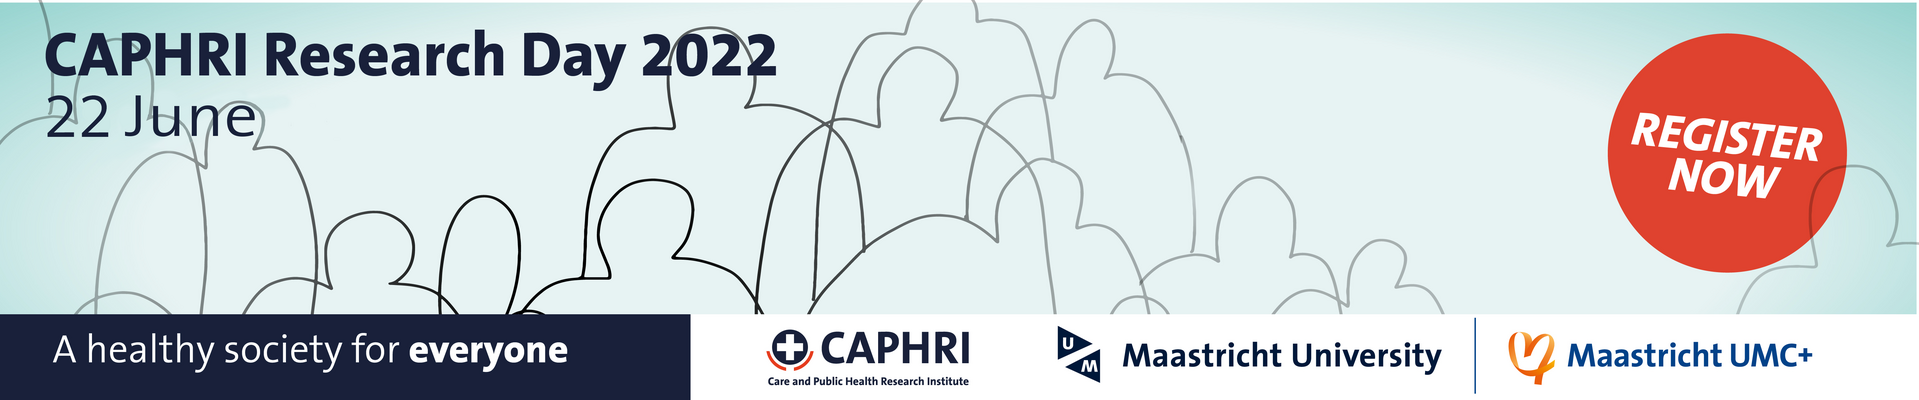 CAPHRI Research Day 2022